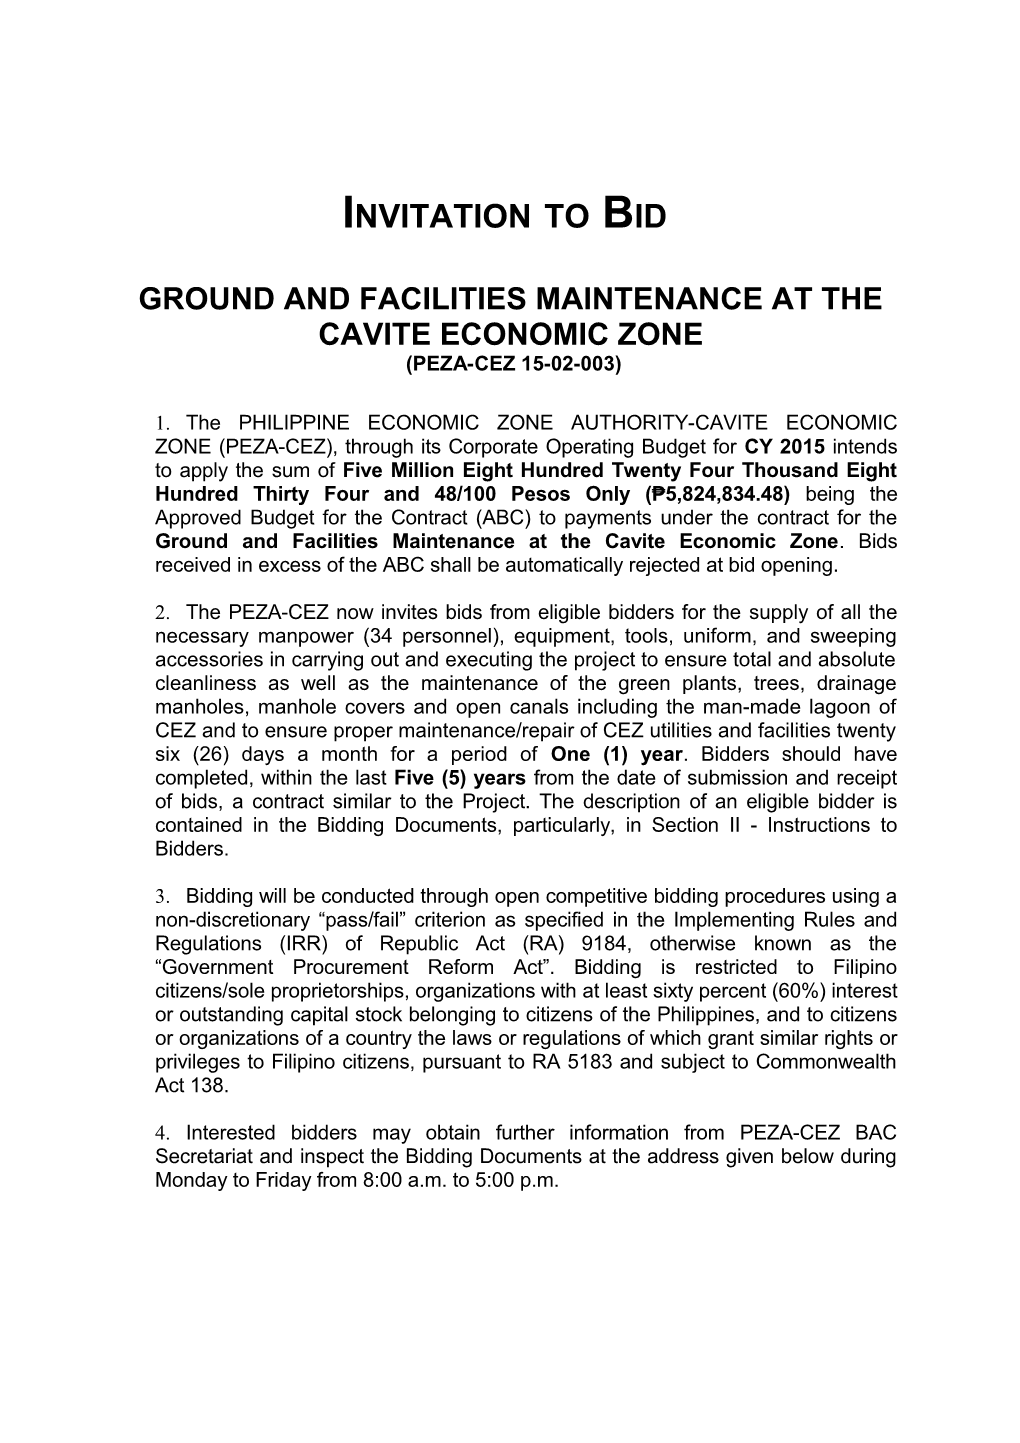 Ground and Facilities Maintenance at the Cavite Economic Zone